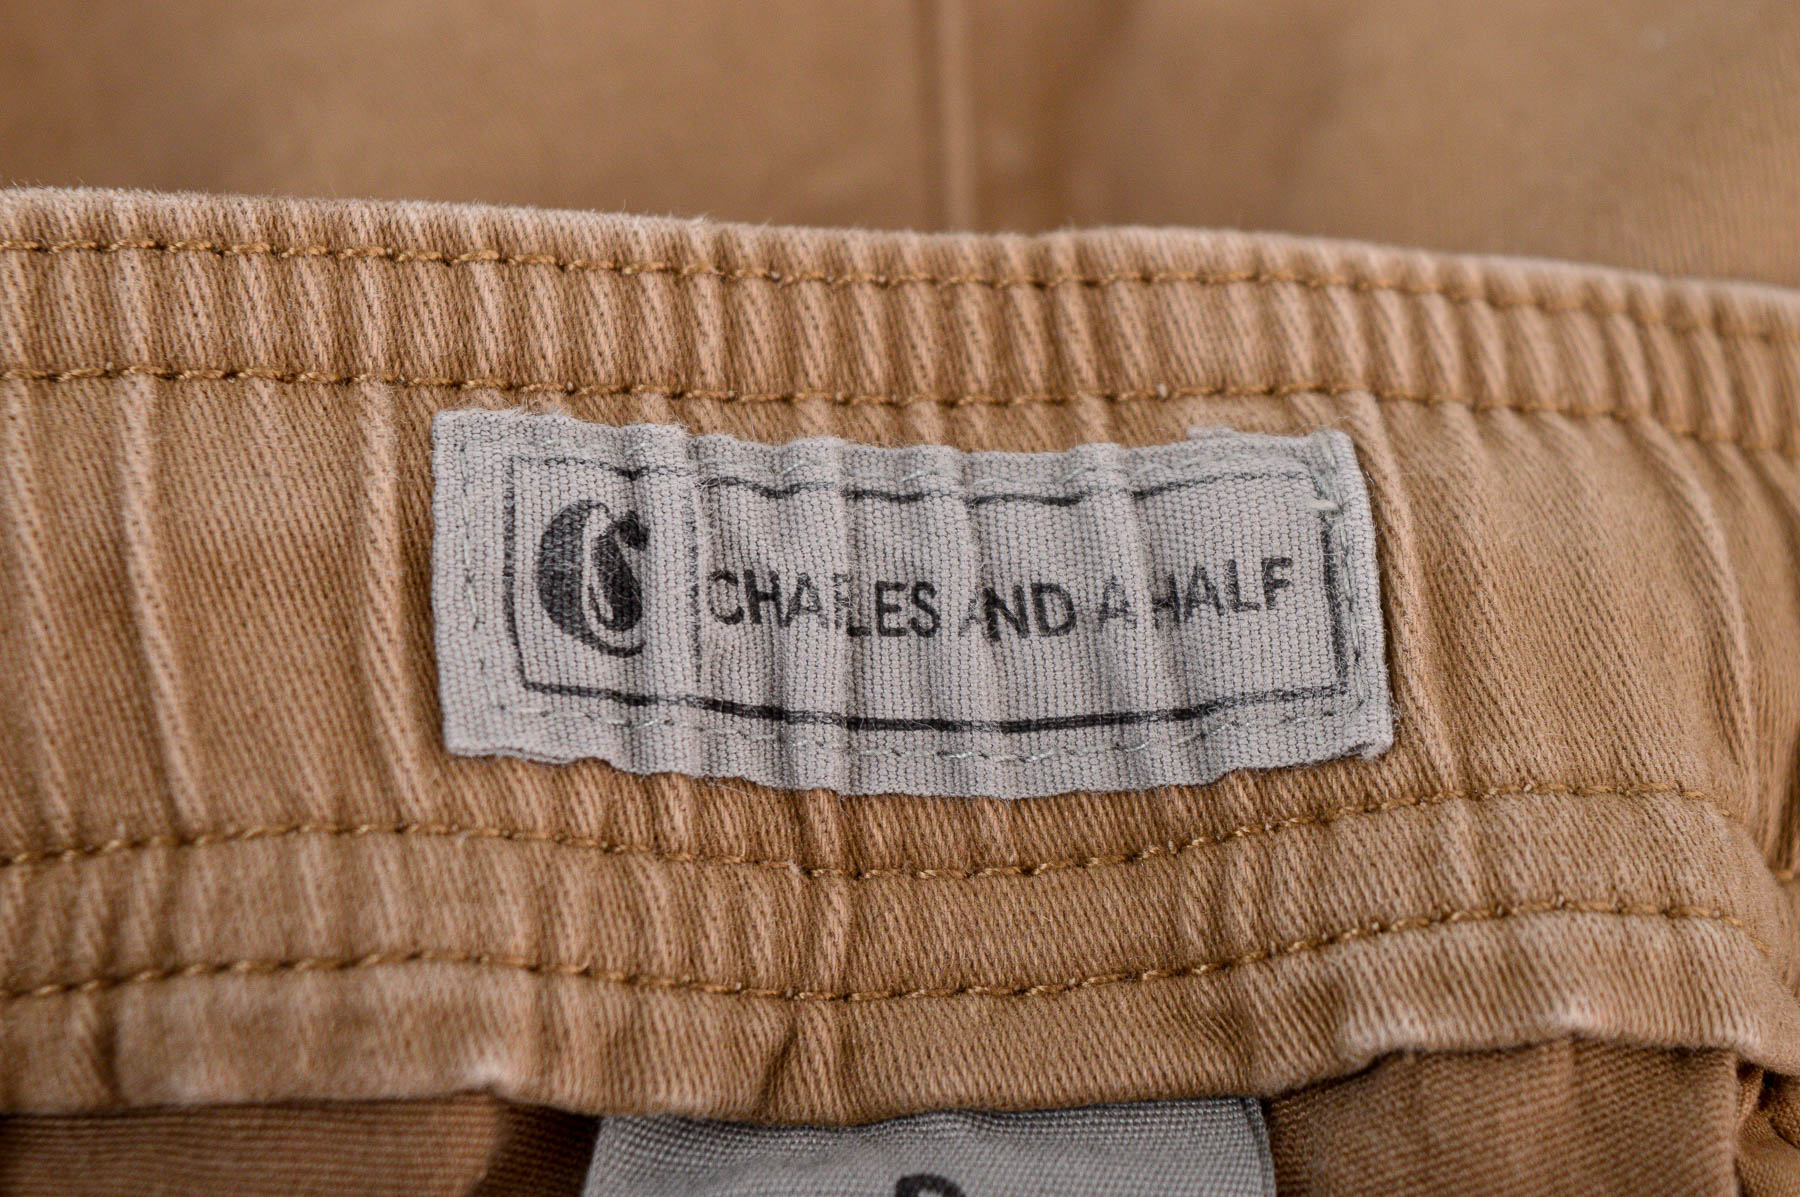 Men's trousers - Charles and a Half - 2